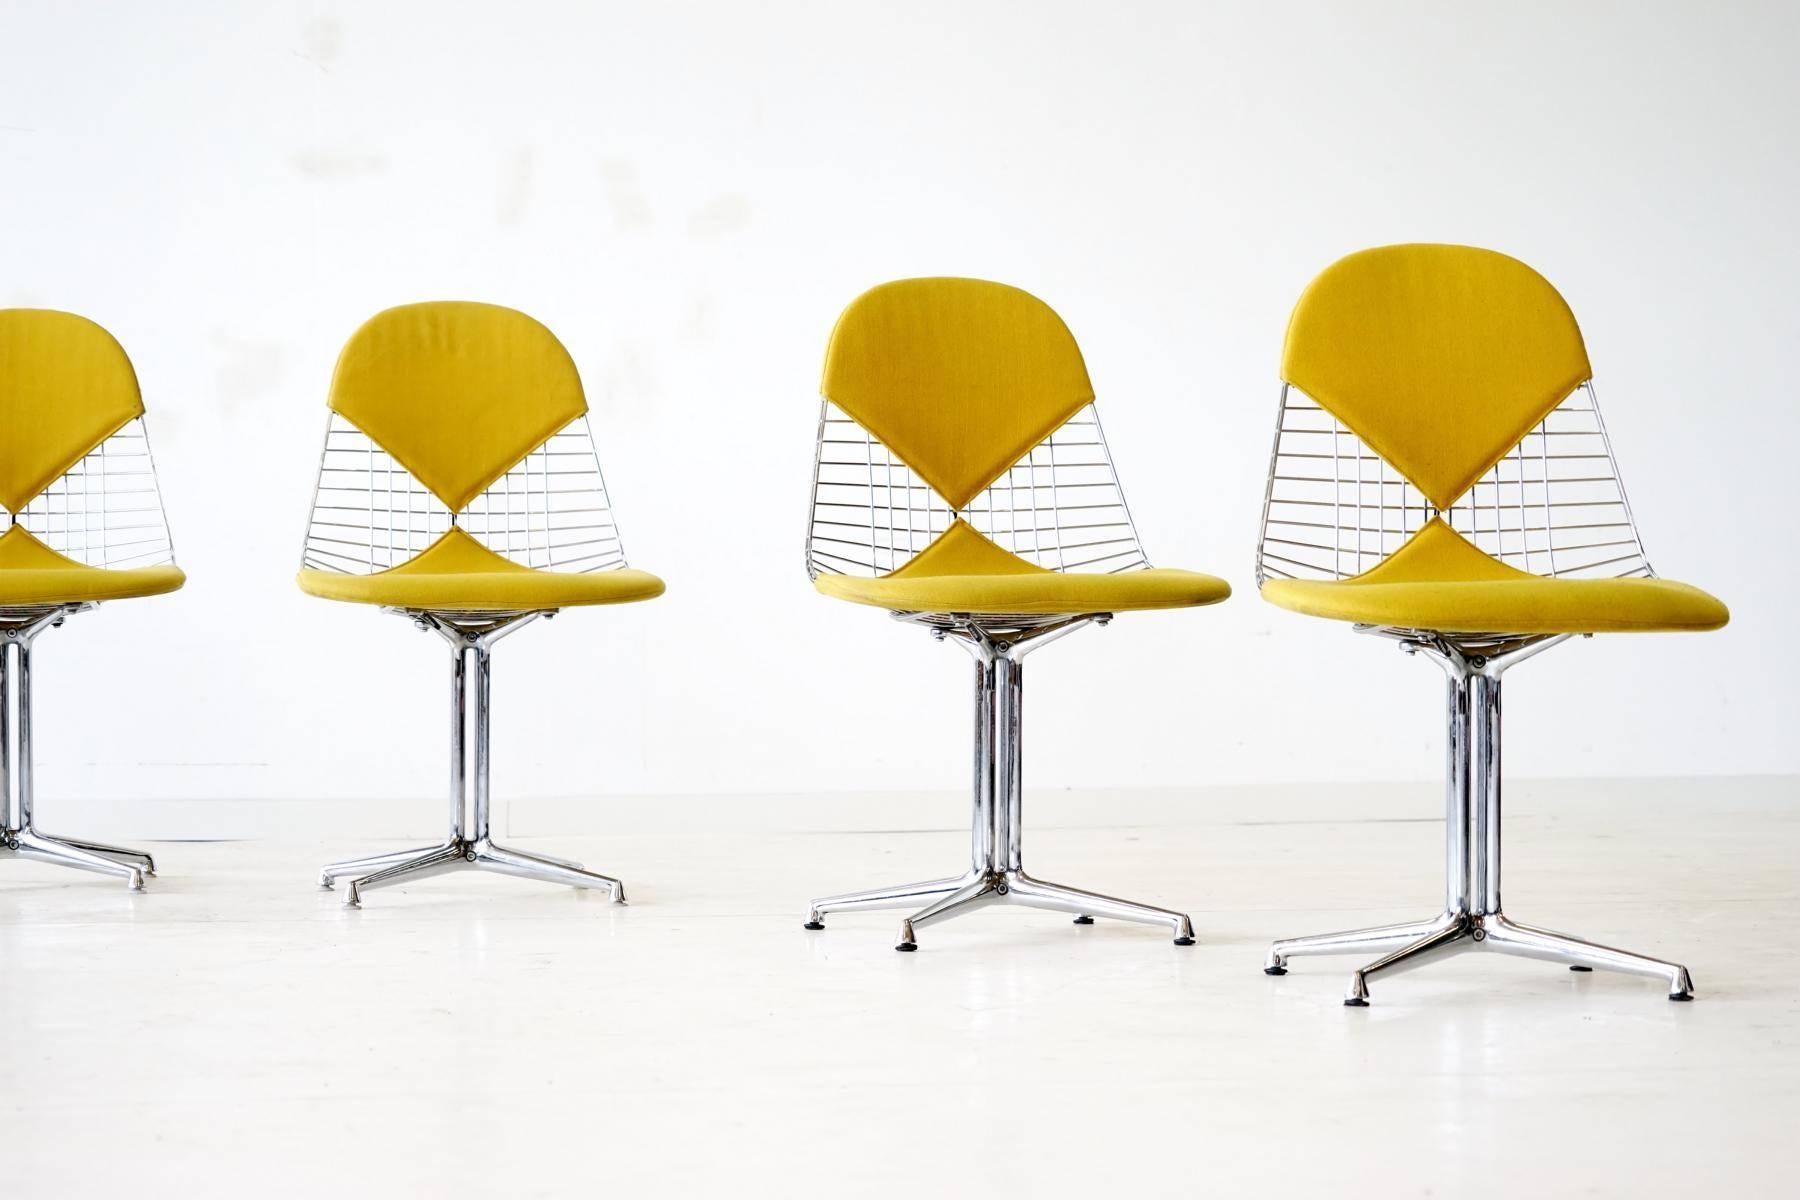 Set of six Eames wire side bikini chair Herman Miller La Fonda base
La Fonda base, chrome. Original condition. Original yellow fabric from Herman Miller. The ideal chairs for the kitchen, dining room, meeting room, etc. Very comfortable. The